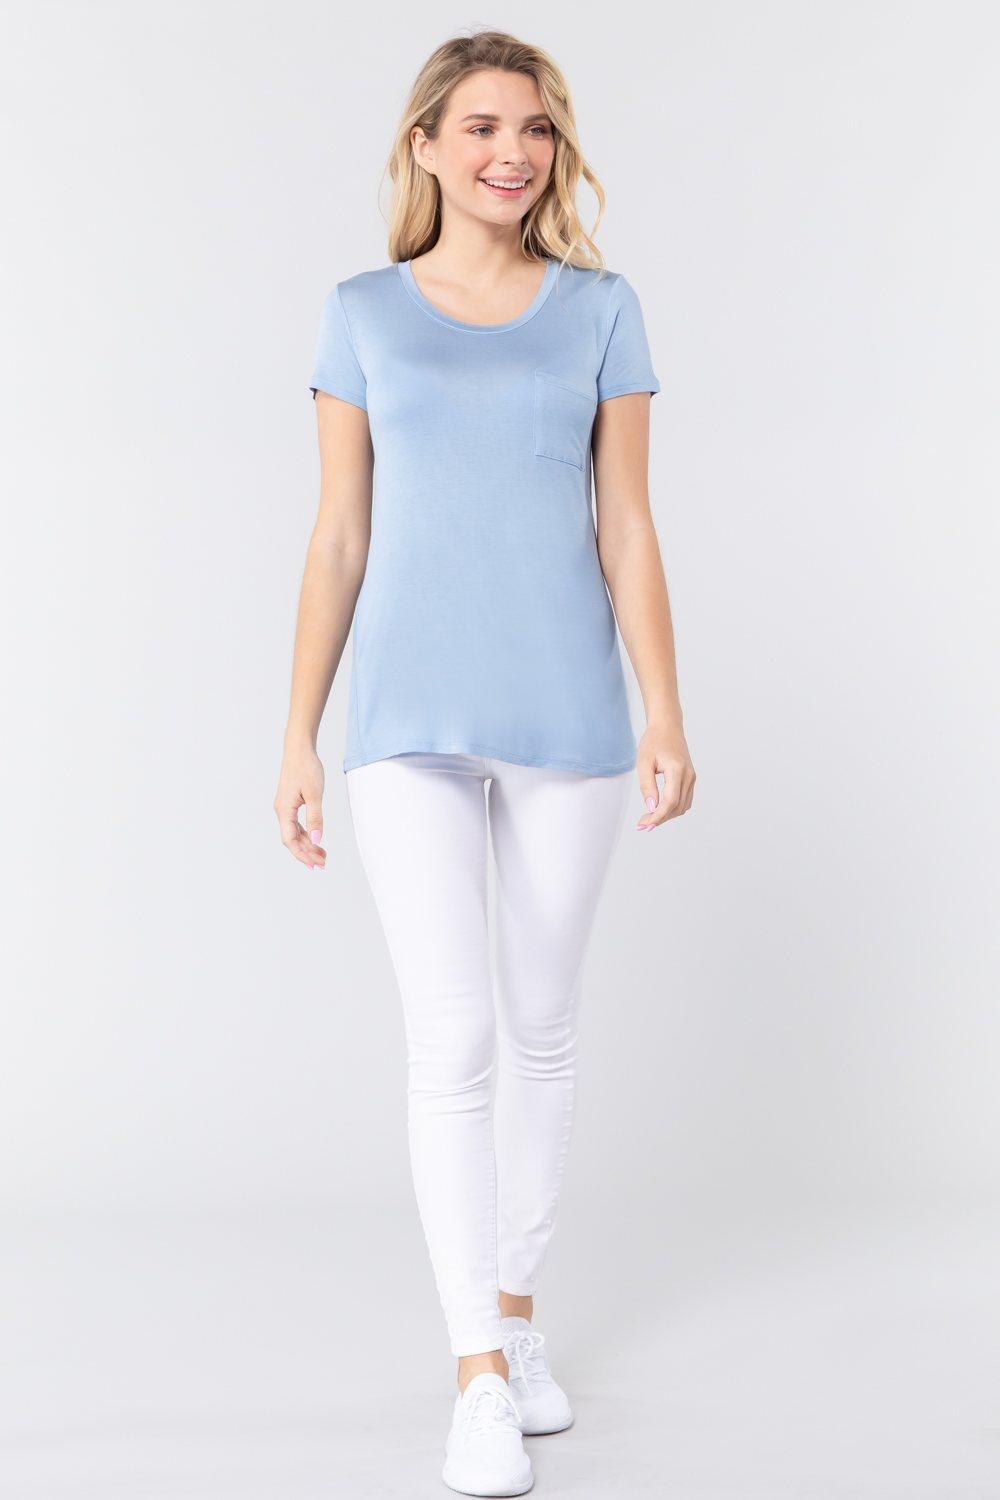 Short Sleeve Scoop Neck Top With Pocket Naughty Smile Fashion